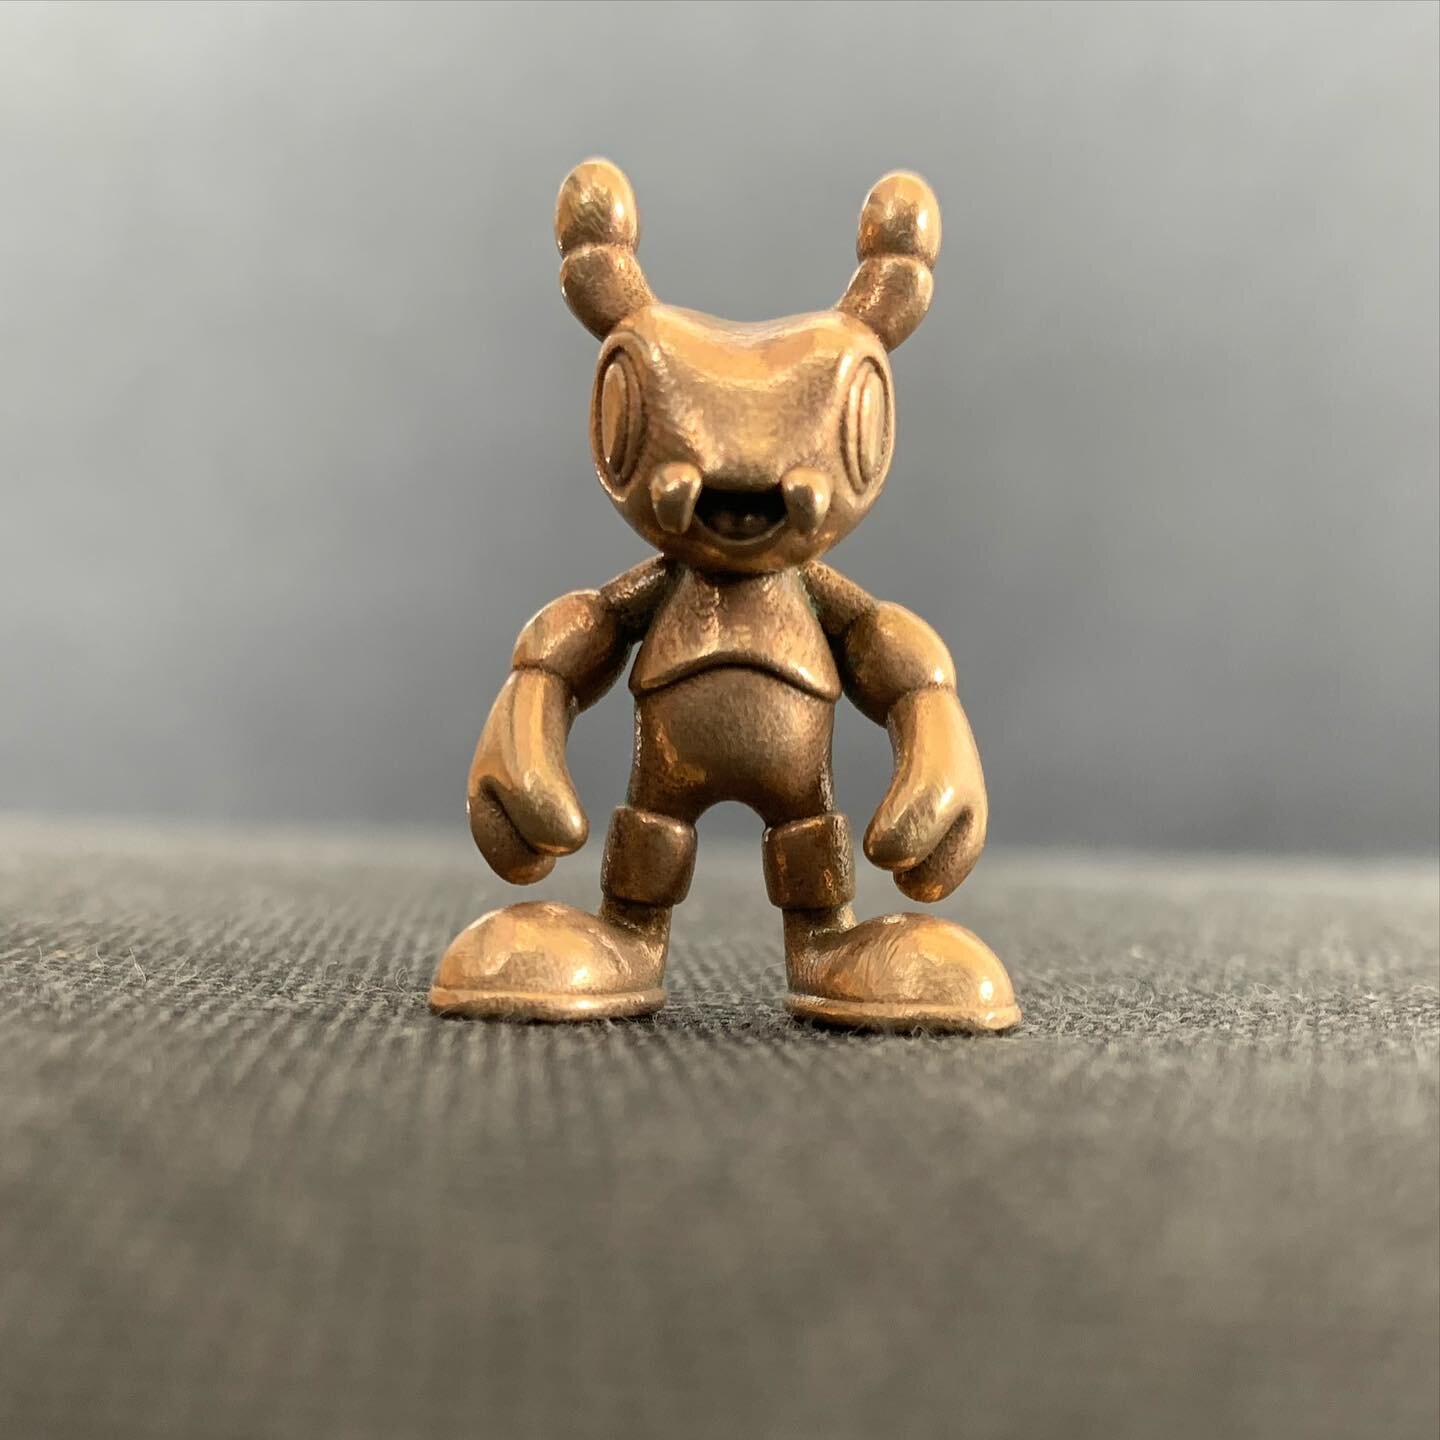 #3dprinting Ant dude.